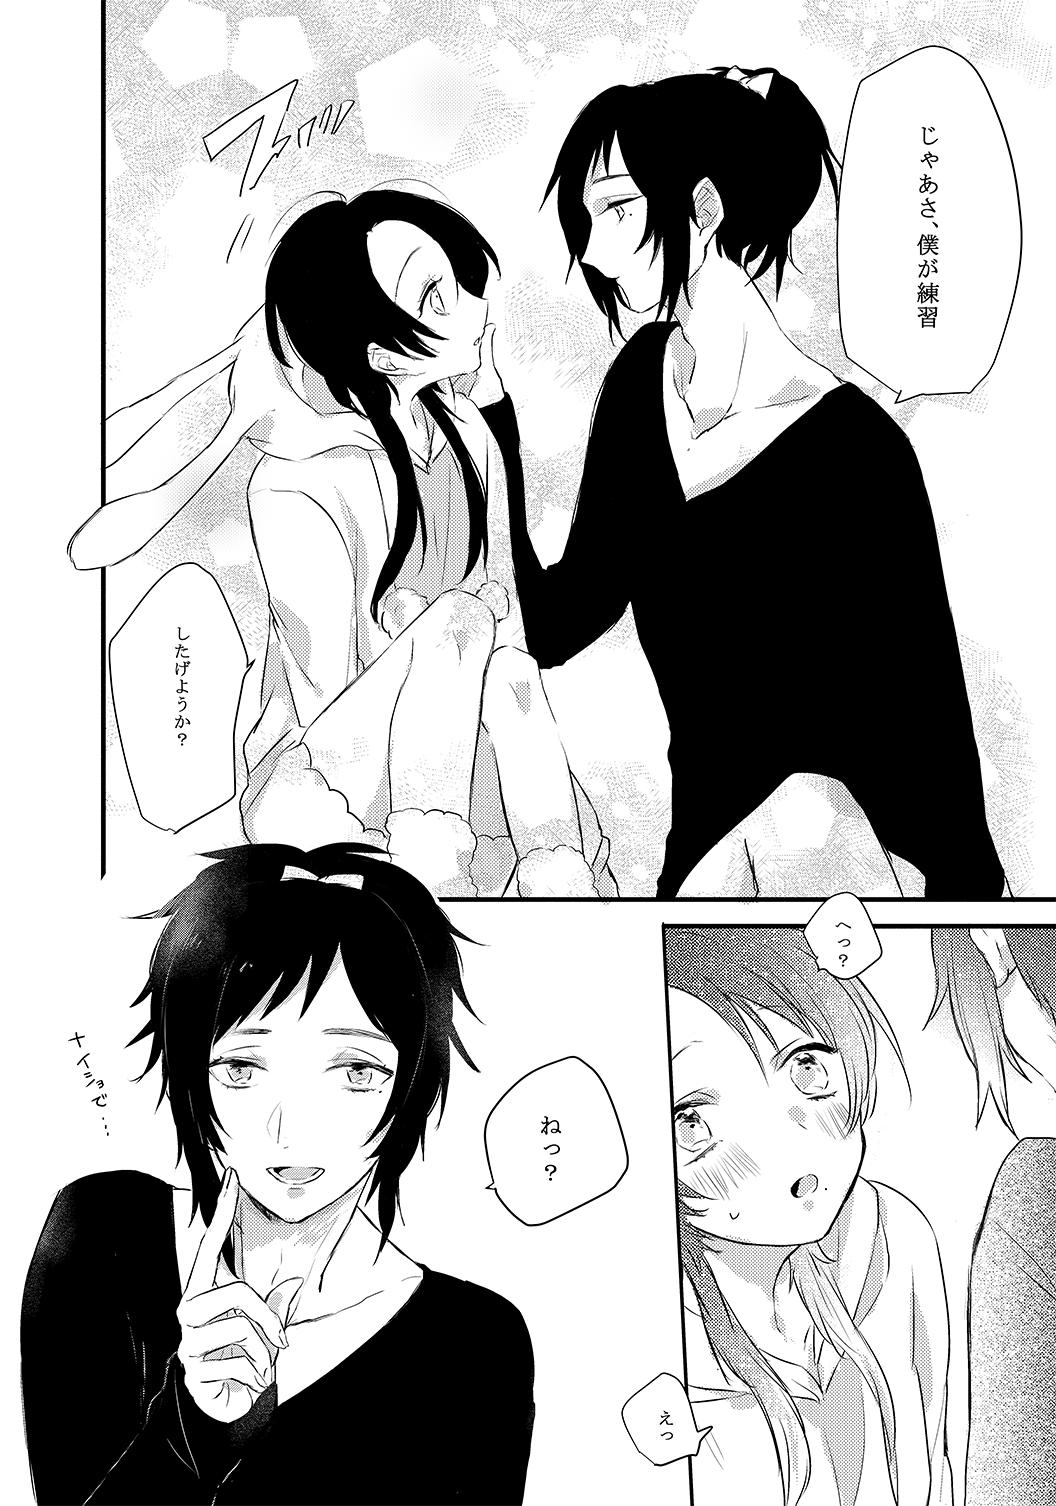 Harcore BROTHER COMPLEX + SISTER COMPLEX - Touken ranbu Cdzinha - Page 10